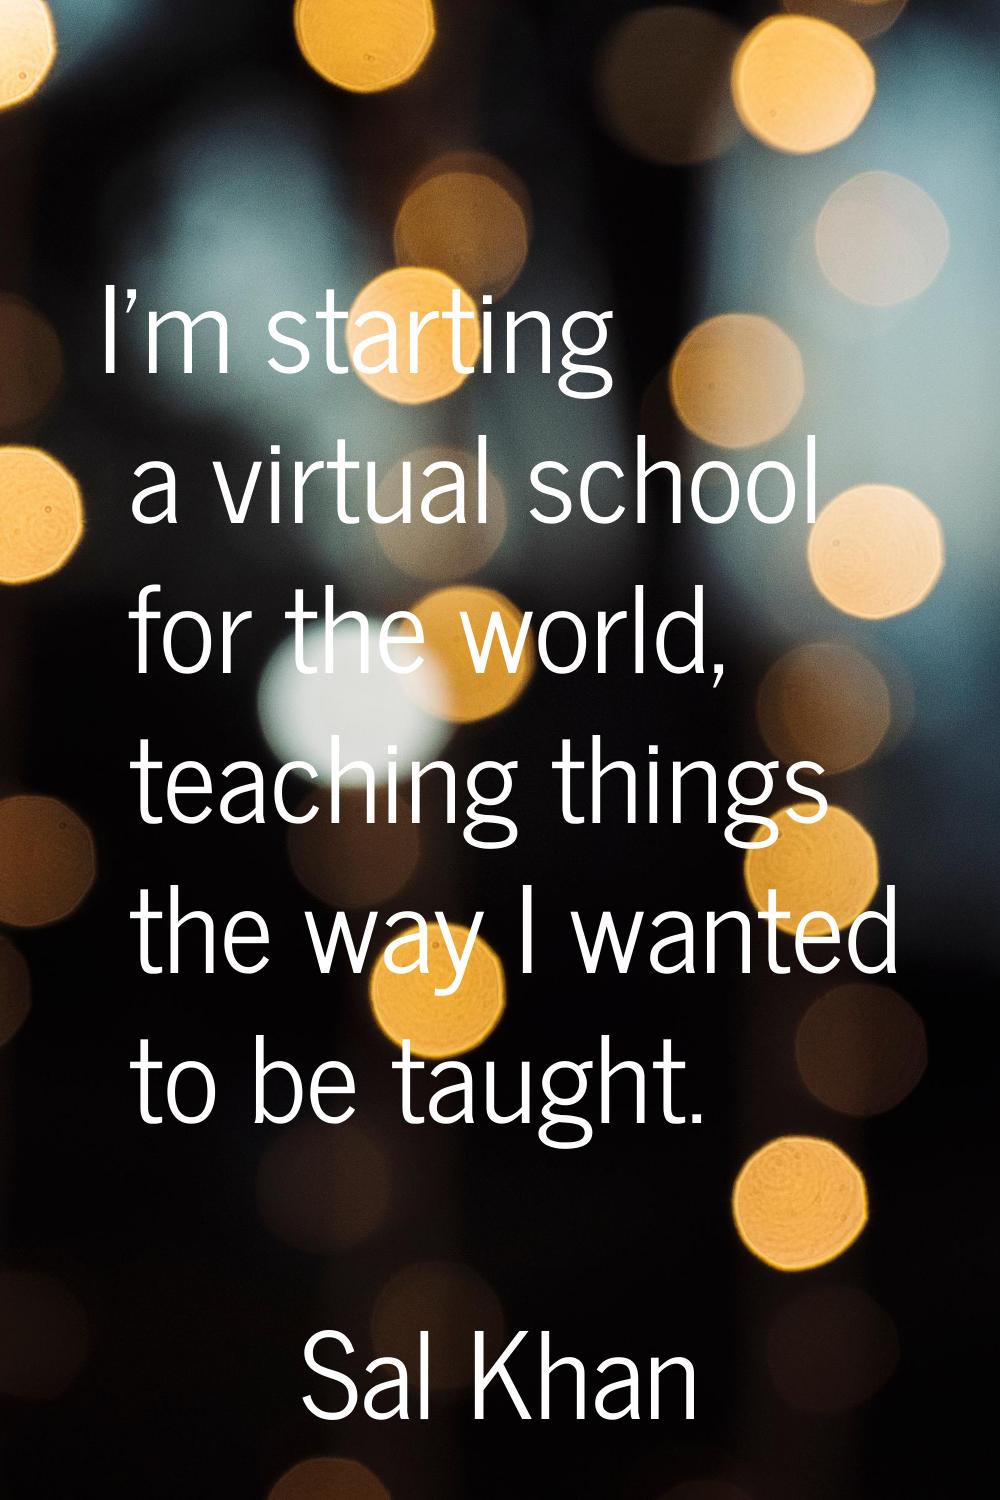 I'm starting a virtual school for the world, teaching things the way I wanted to be taught.